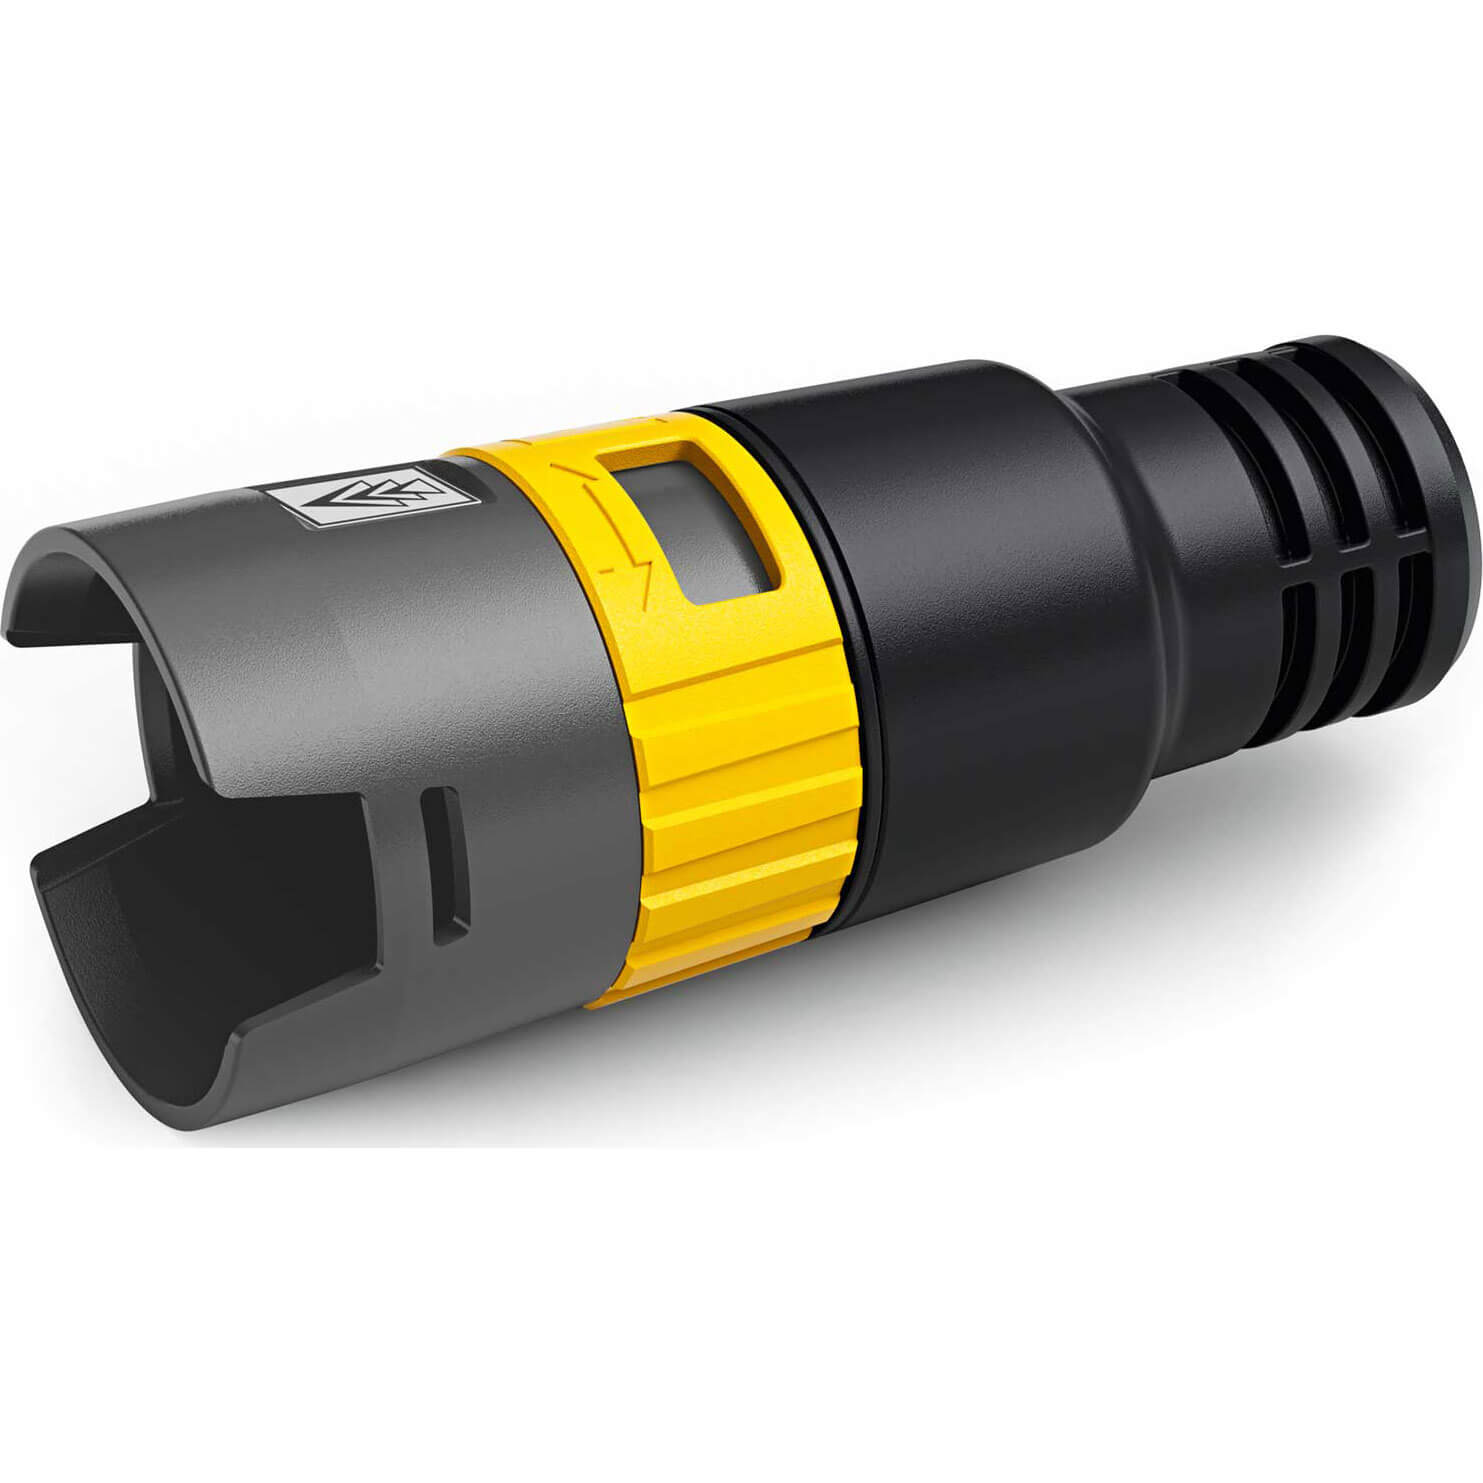 Image of Karcher Anti Static Power Tool Adaptor for NT 22/1, 30/1 and 40/1 Vacuum Cleaners